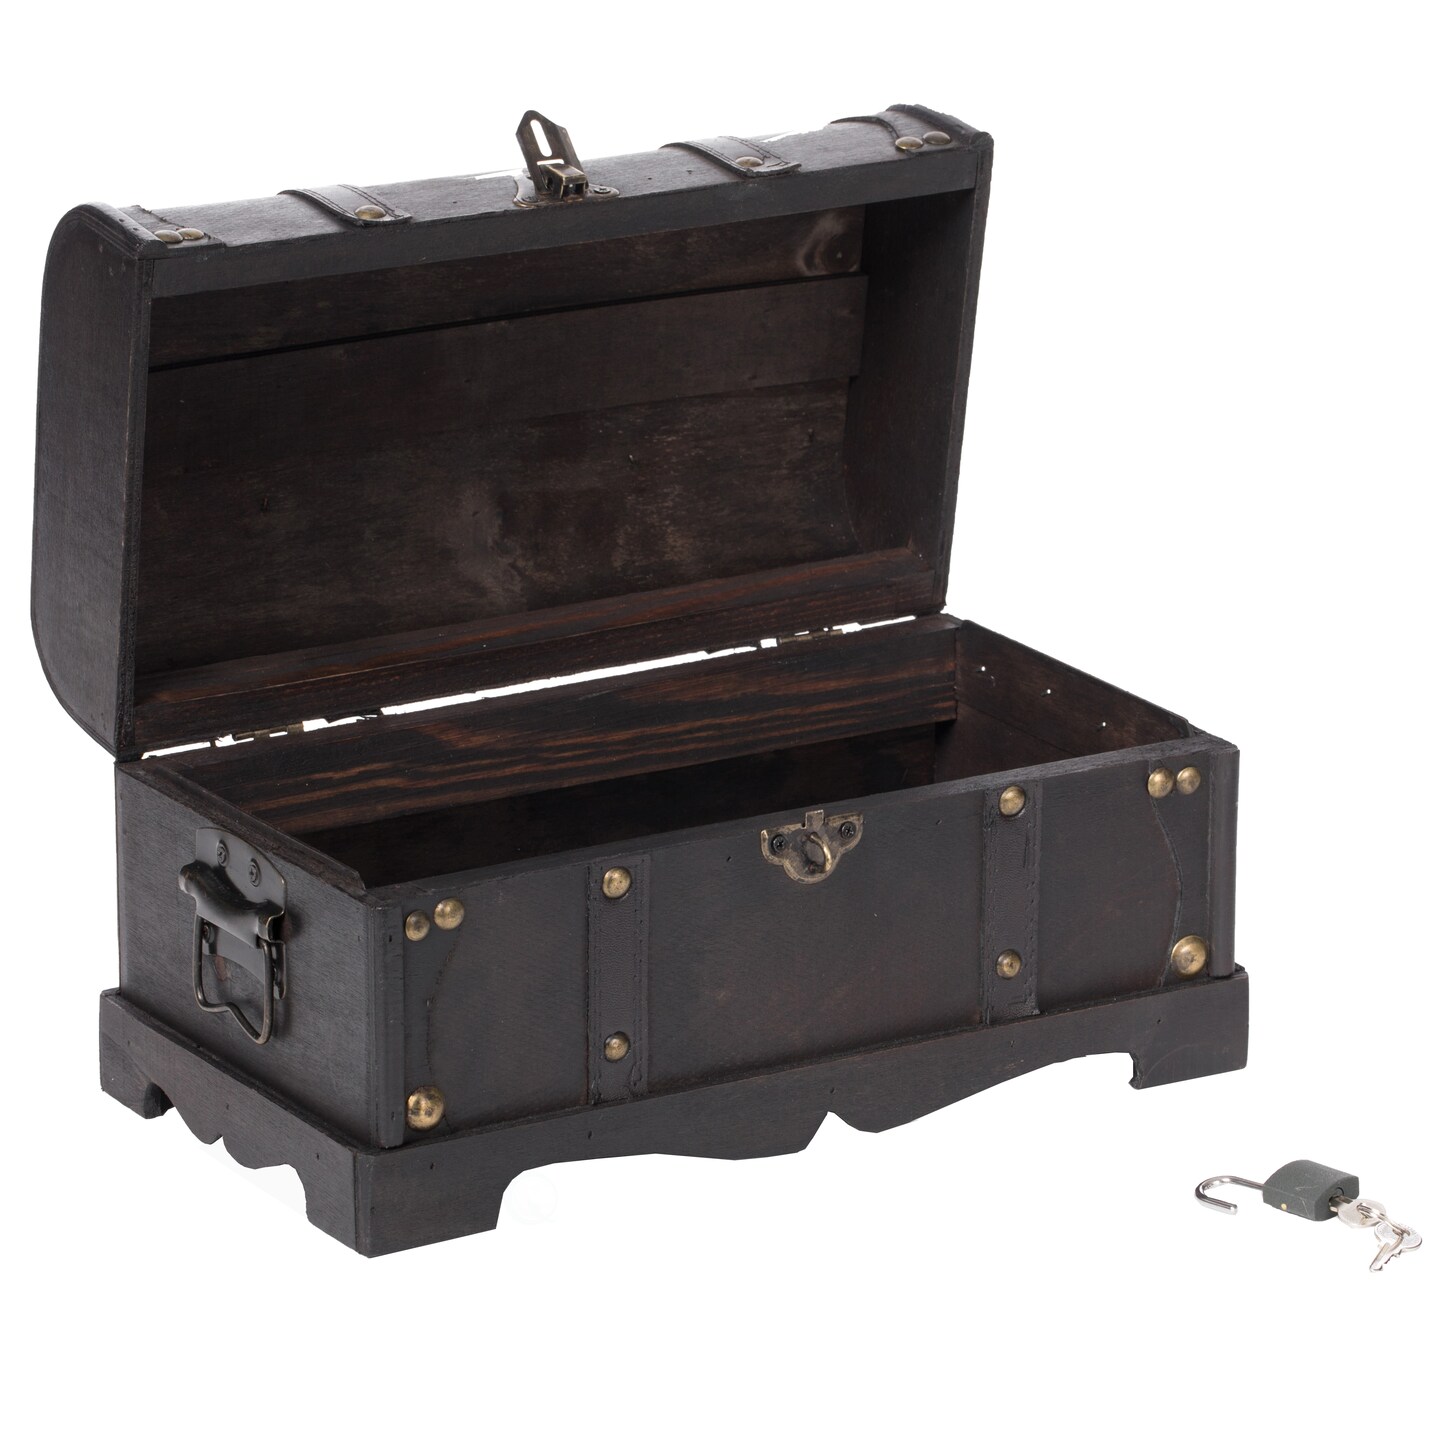 Small Pirate Style Wooden Treasure Chest